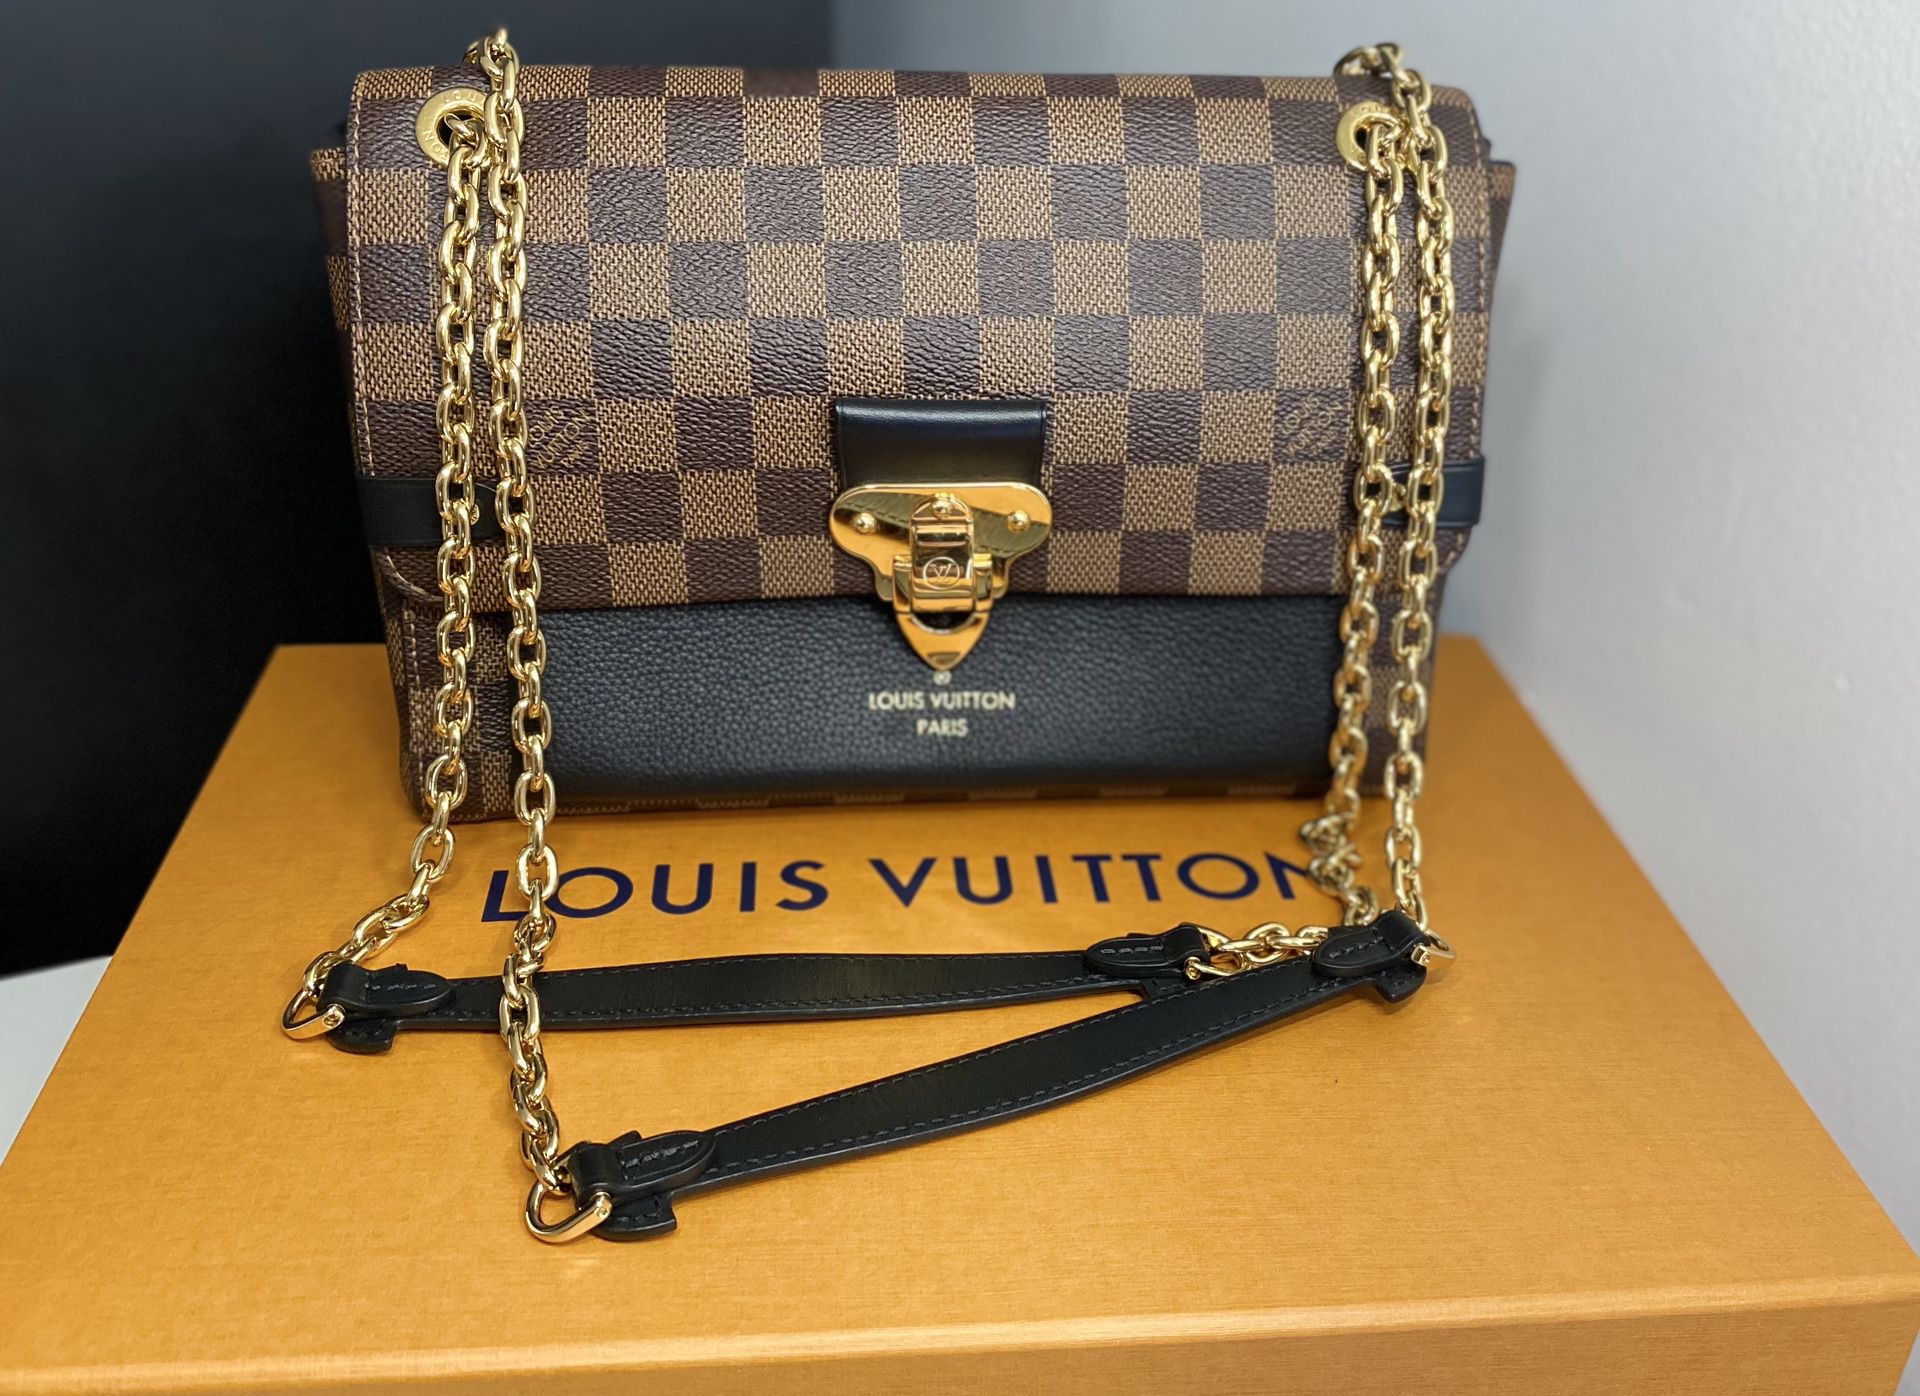 Authentic Louis Vuitton vavin tote for Sale in Salem, OR - OfferUp